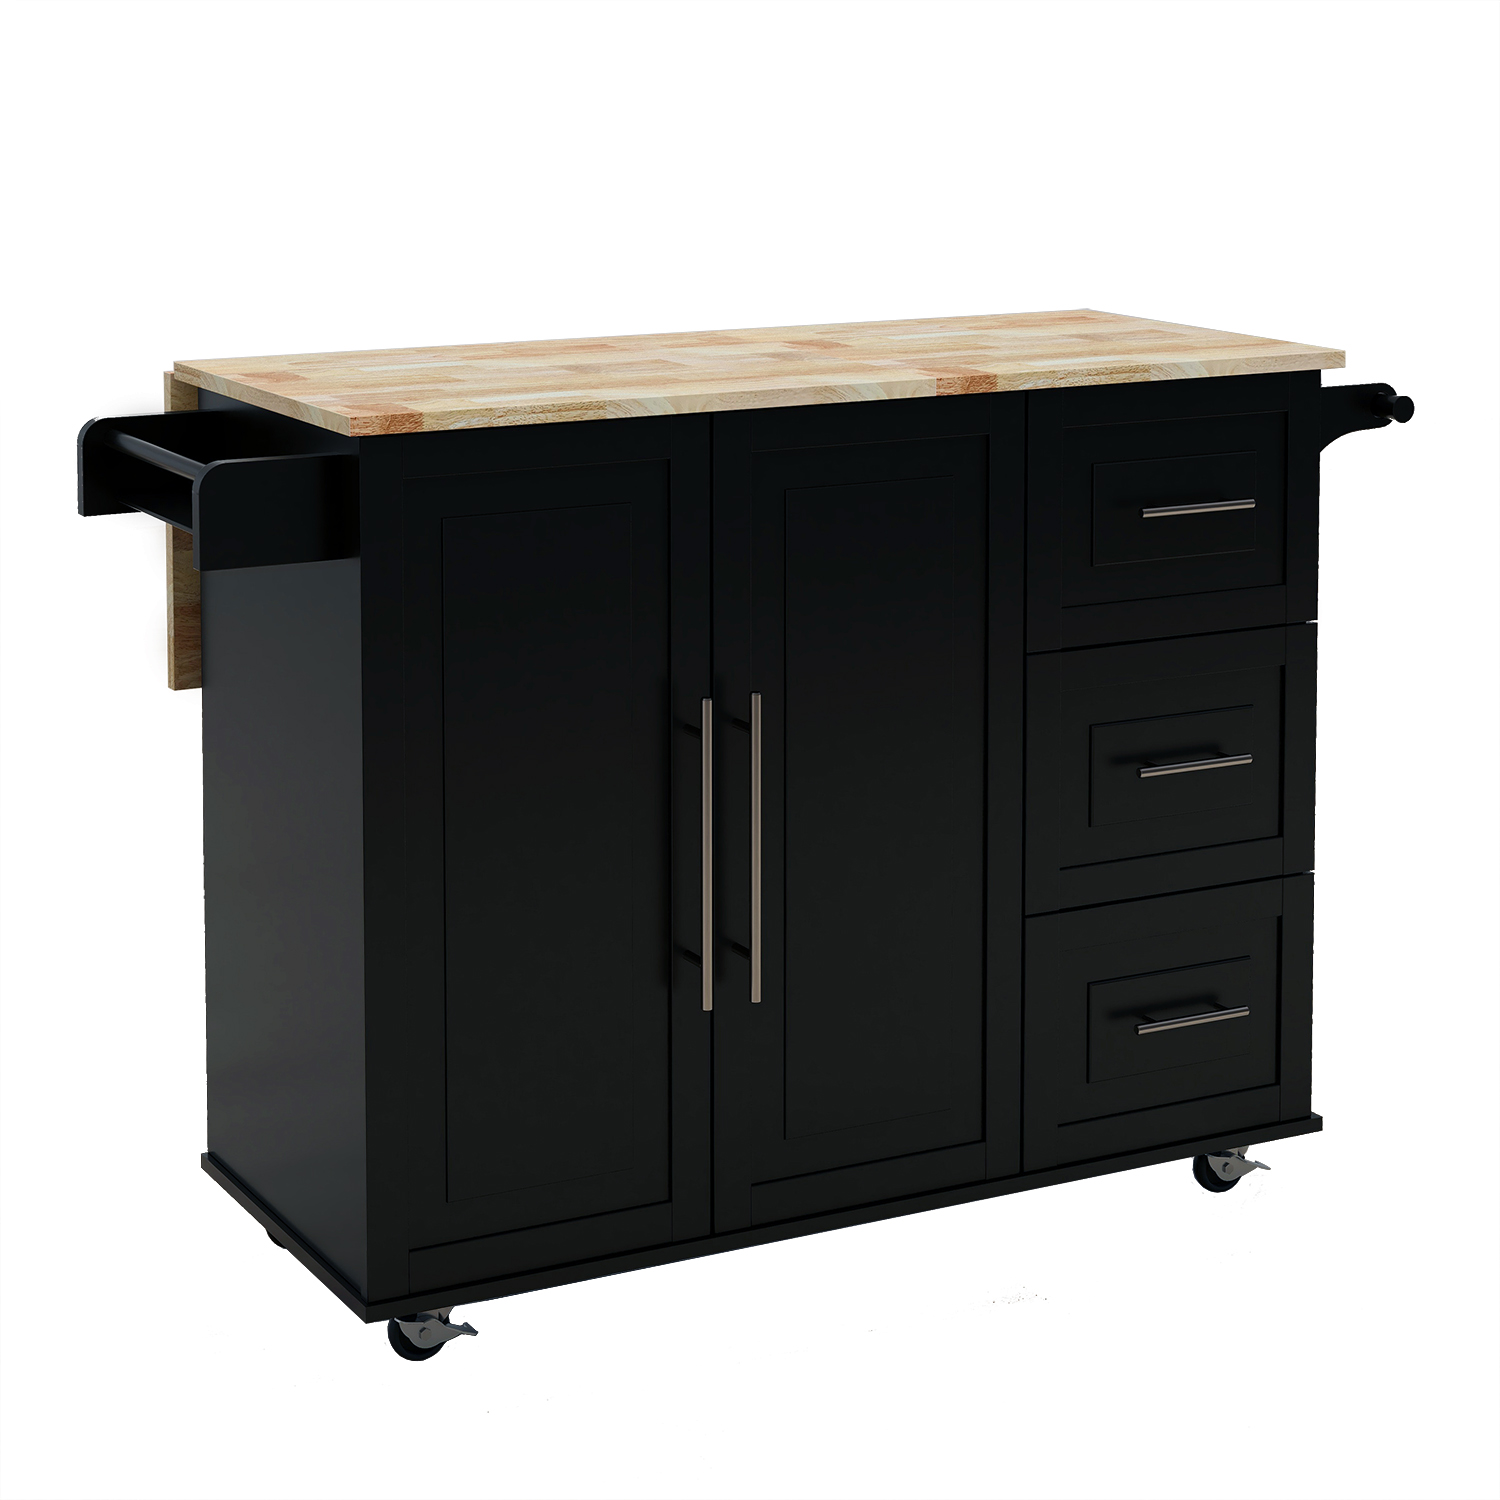 Kitchen Island with Spice Rack, Towel Rack and Extensible Solid Wood Table Top-Black-CASAINC